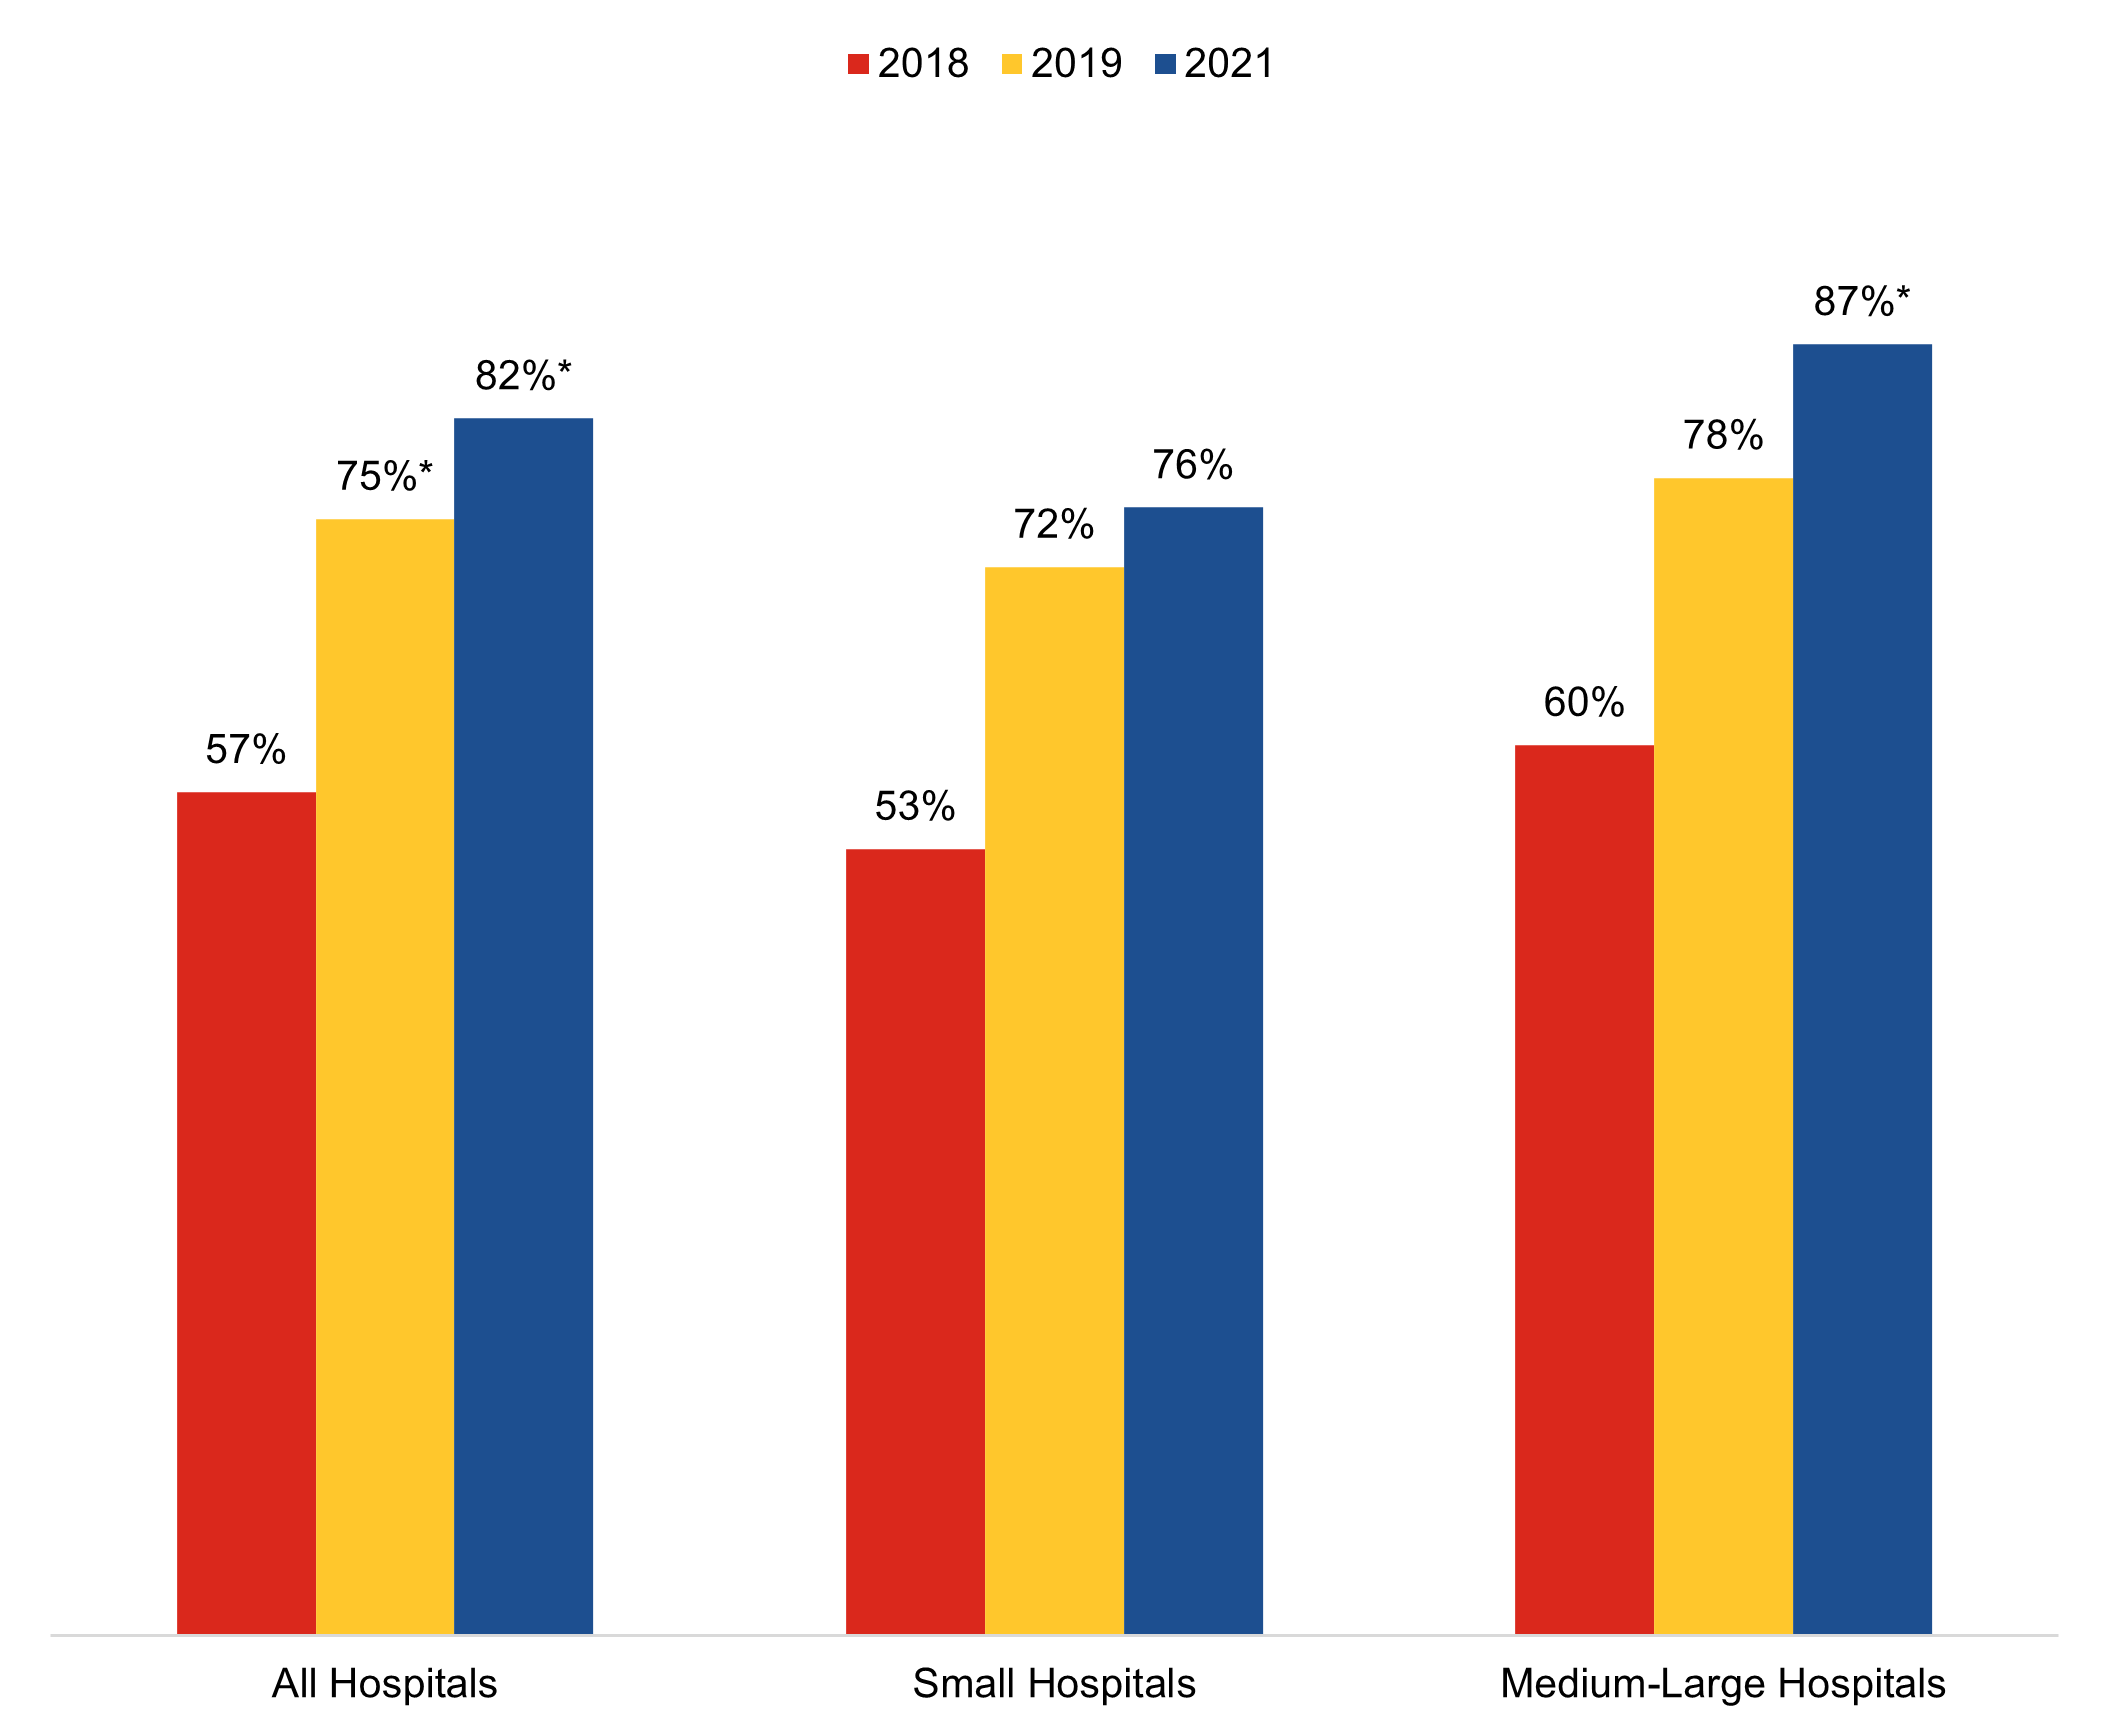 The figure is a bar chart that shows the percent of all hospitals, small hospitals and medium and large hospitals that provided patients access to clinical notes through an online portal for the years 2018, 2019 and 2021. In 2018, 57 percent of all hospitals, 53 percent of small hospitals, and 60 percent of medium and large hospitals provided patients access to clinical notes through an online portal. In 2019, 75 percent of all hospitals, 72 percent of small hospitals, and 78 percent of medium and large hospitals provided patients access to their clinical notes through an online portal. These were all statistically significant increases from 2018. In 2021, 82 percent of all hospitals, 76 percent of small hospitals, and 87 percent of medium and large hospitals provided patients access to their health information through an app. These were statistically significant increases for all hospitals and medium and large hospitals from 2019.